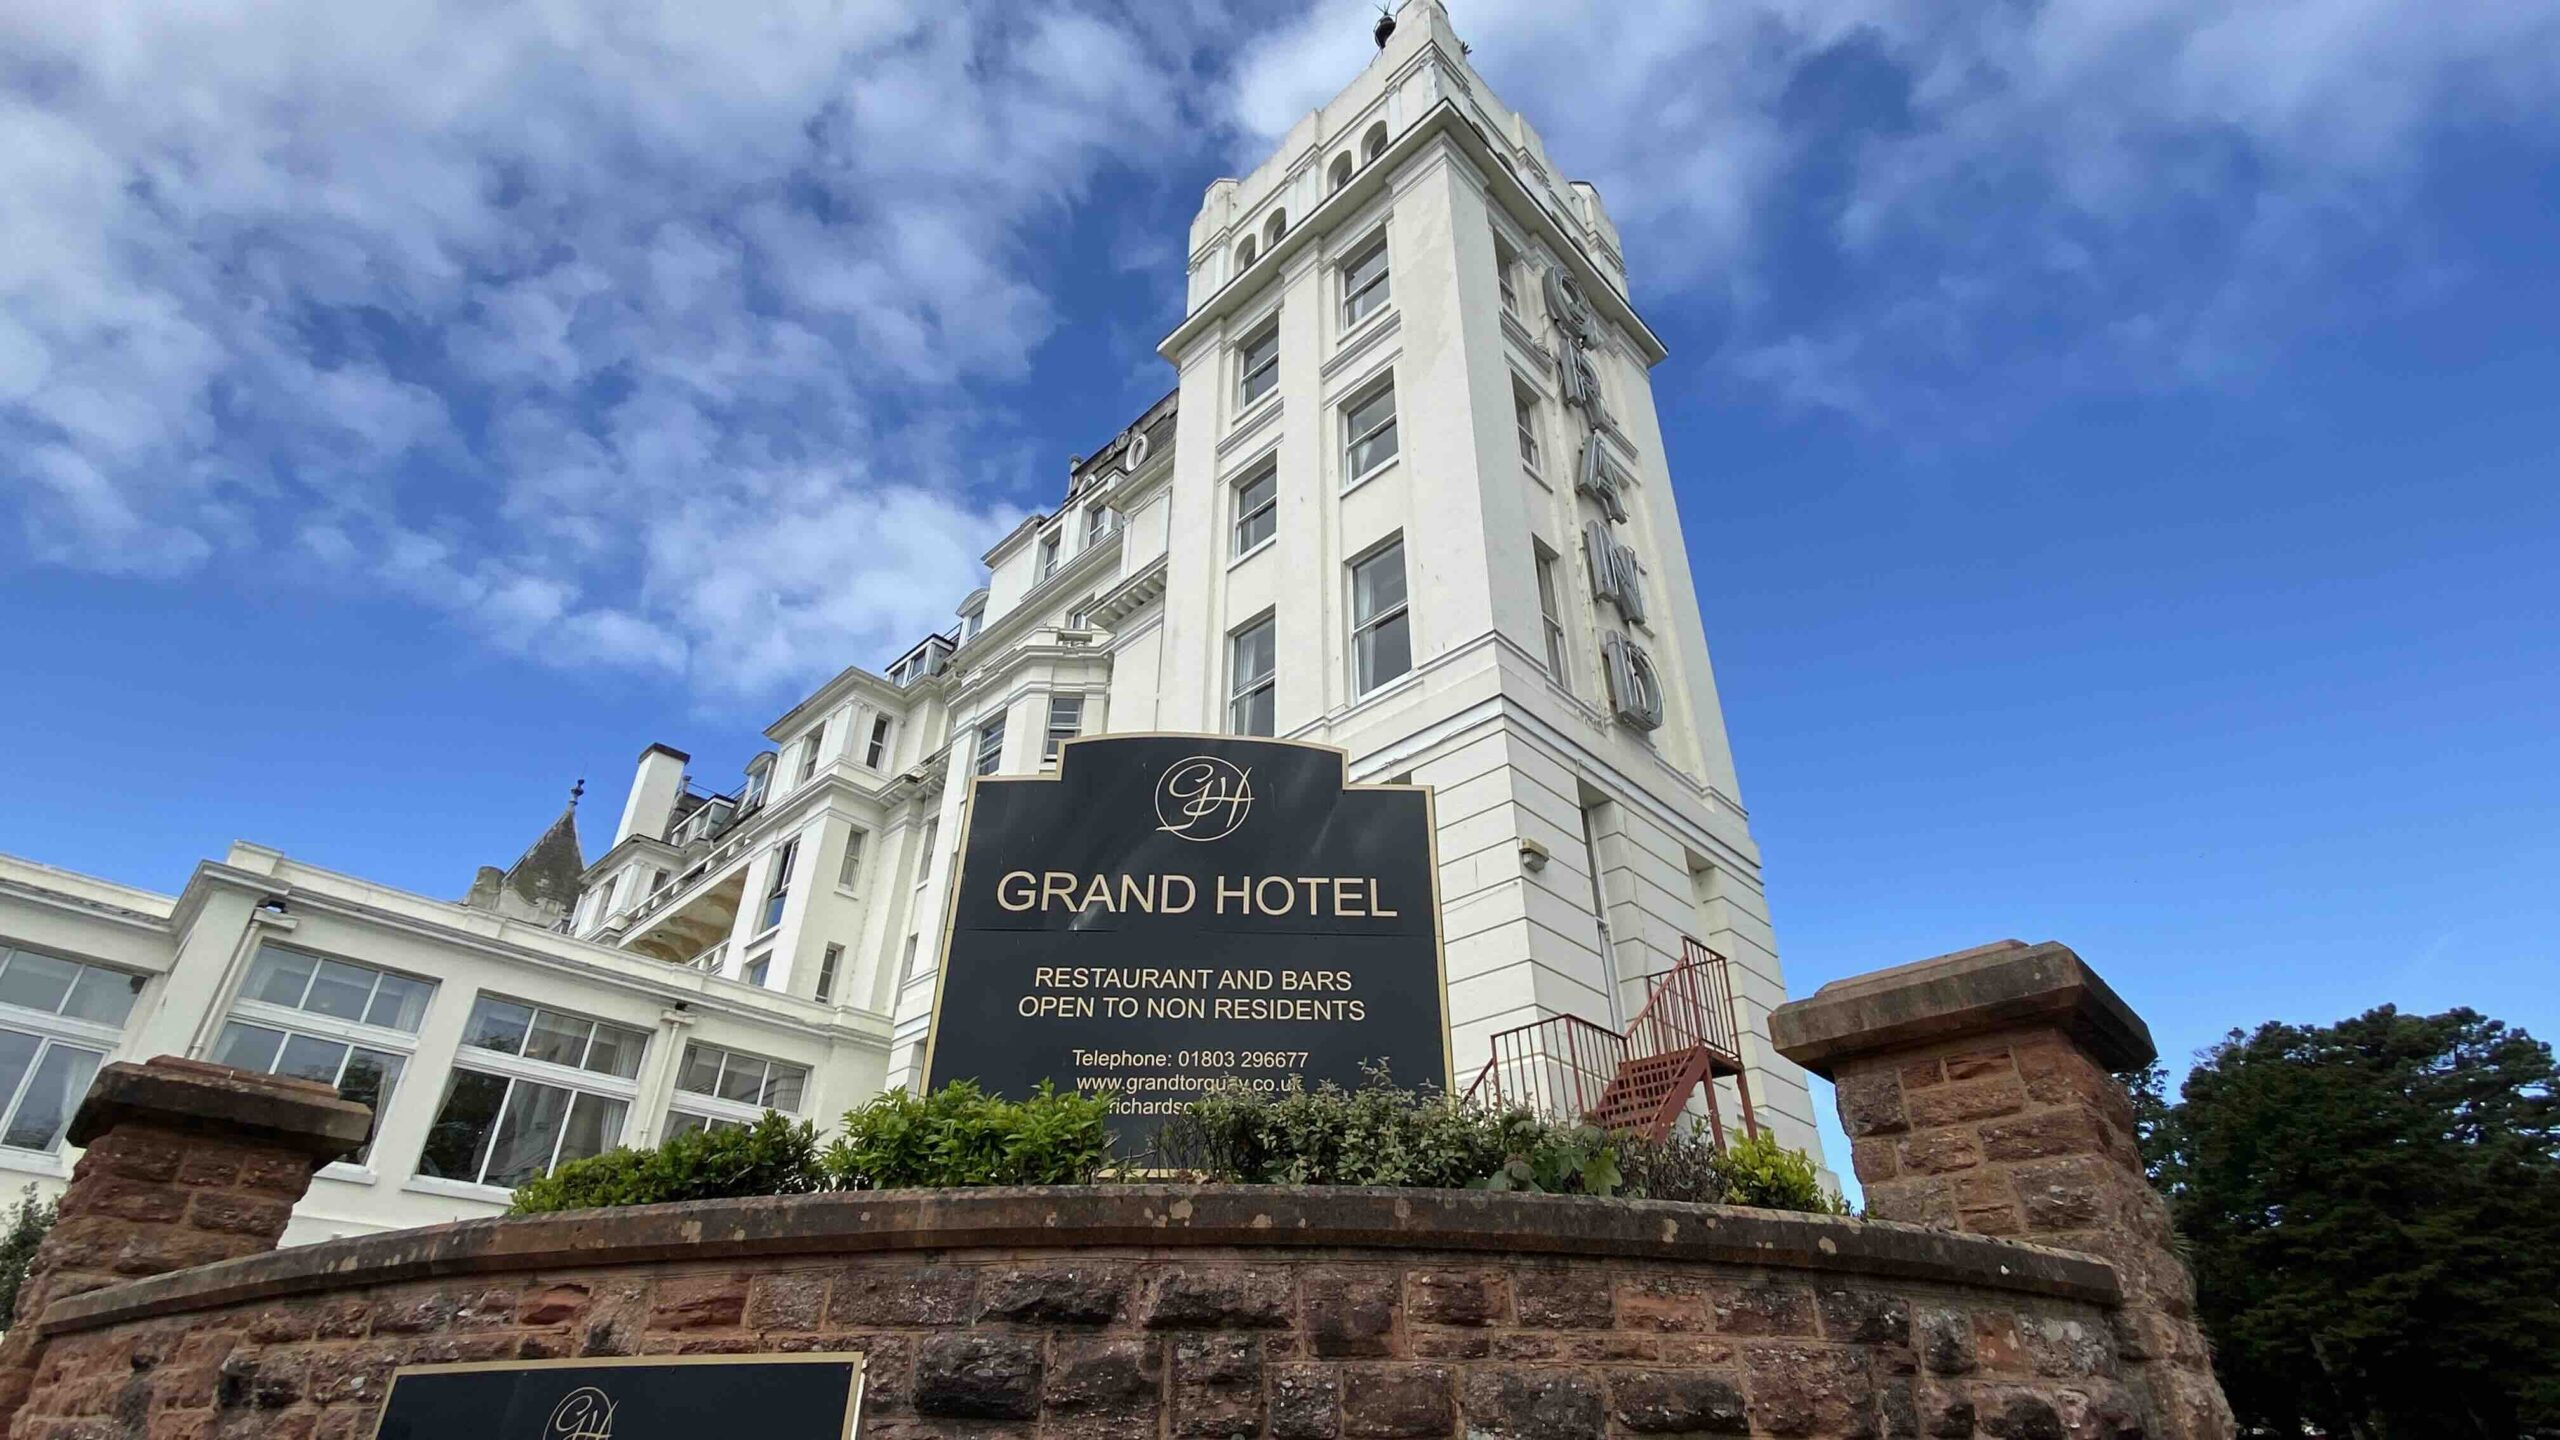 The Grand Hotel in Torquay at the Agathatha Christie Festival